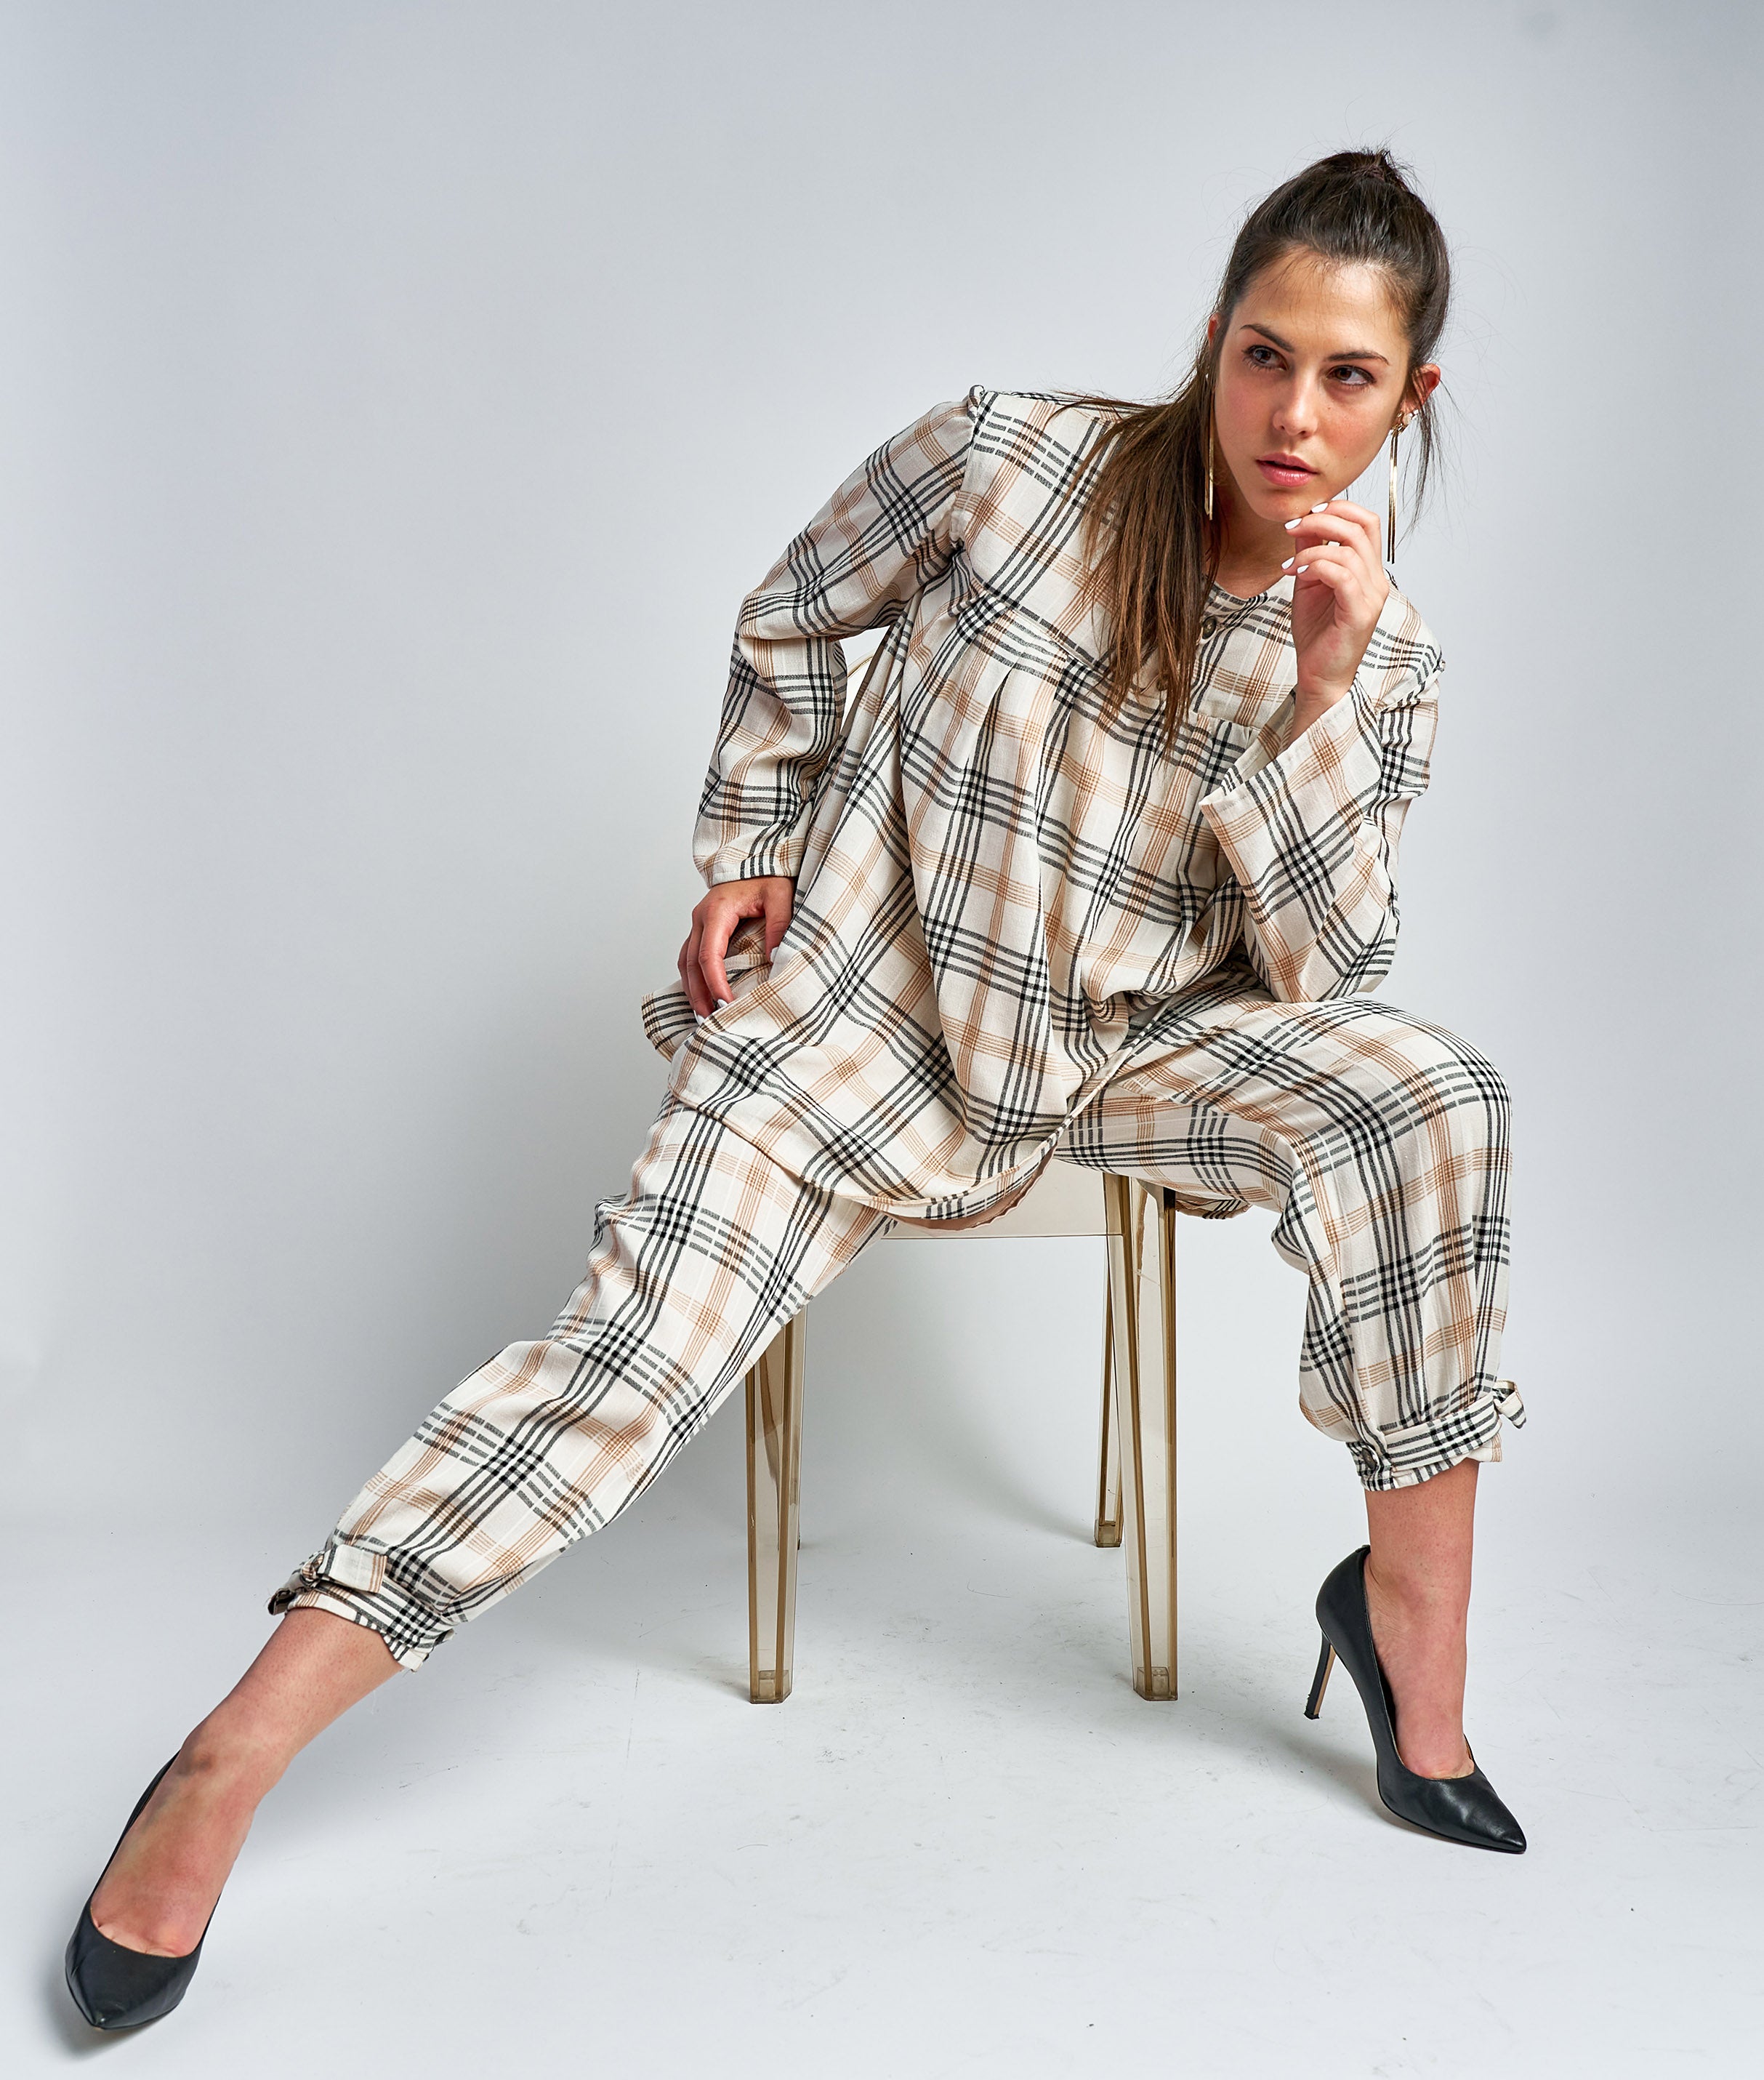 Women’s Tops | Relaxed fit pleated plaid top | Lifestyle shot 2 | Emily Westenberger